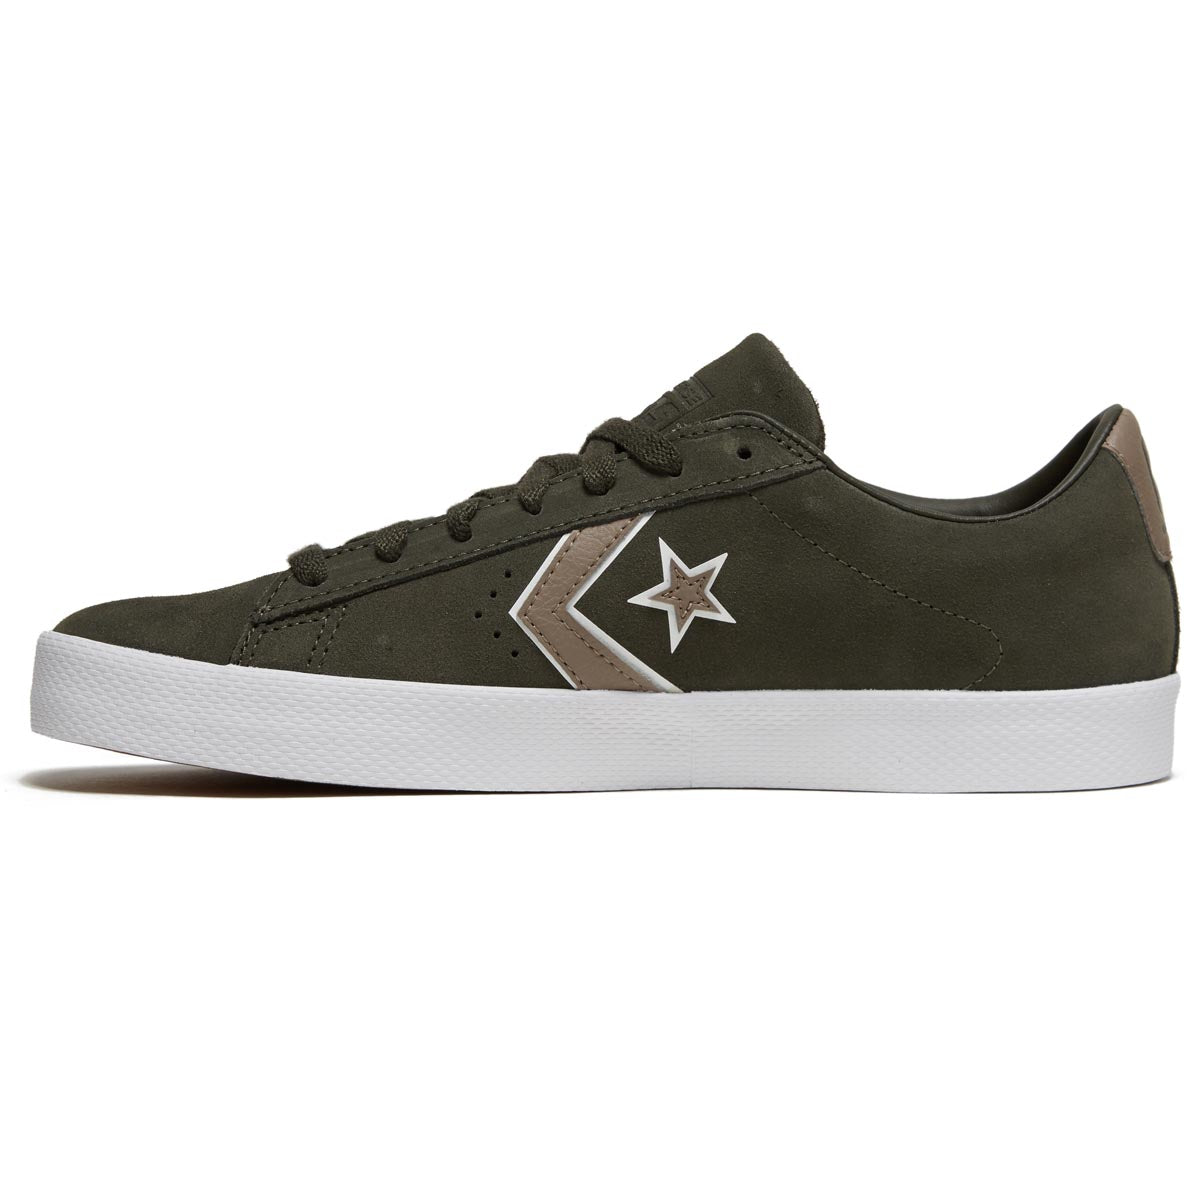 Converse Pl Vulc Pro Classic Suede Ox Shoes - Cave Green/White/Mud Mask image 2